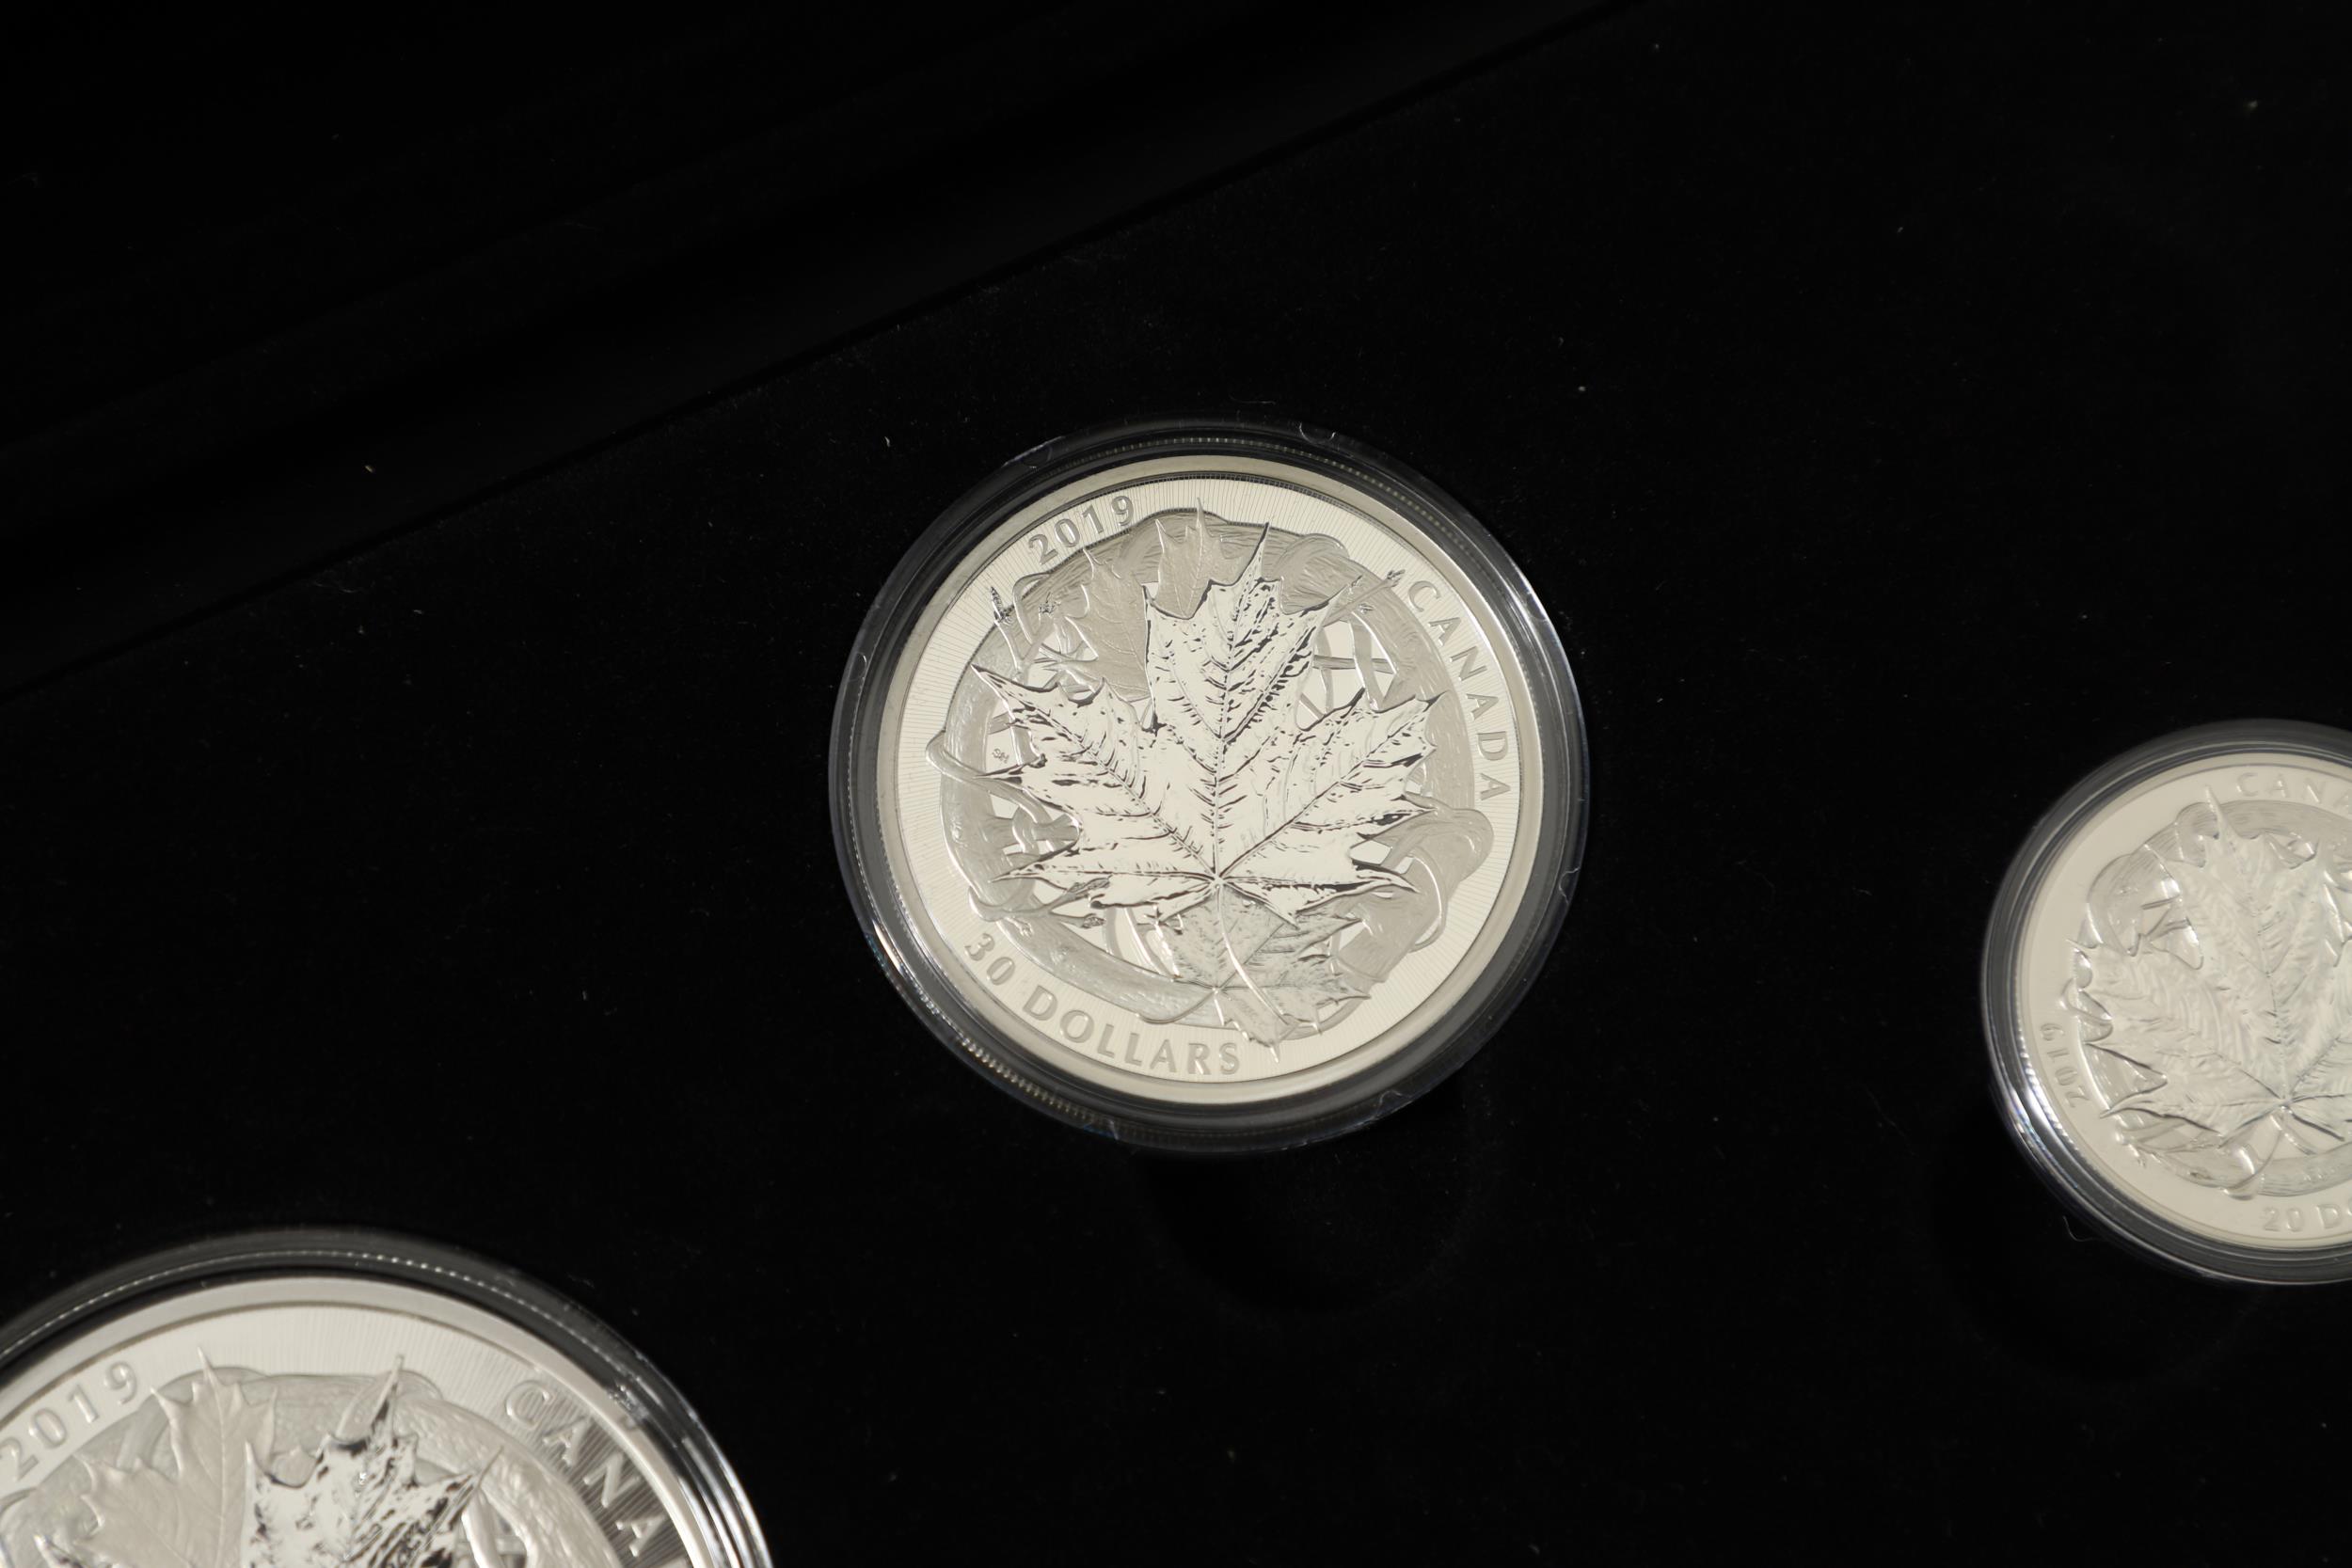 AN ELIZABETH II ROYAL CANADIAN MINT SILVER FIVE COIN 'MAPLE MASTERS' COLLECTION. 2019. - Bild 12 aus 15